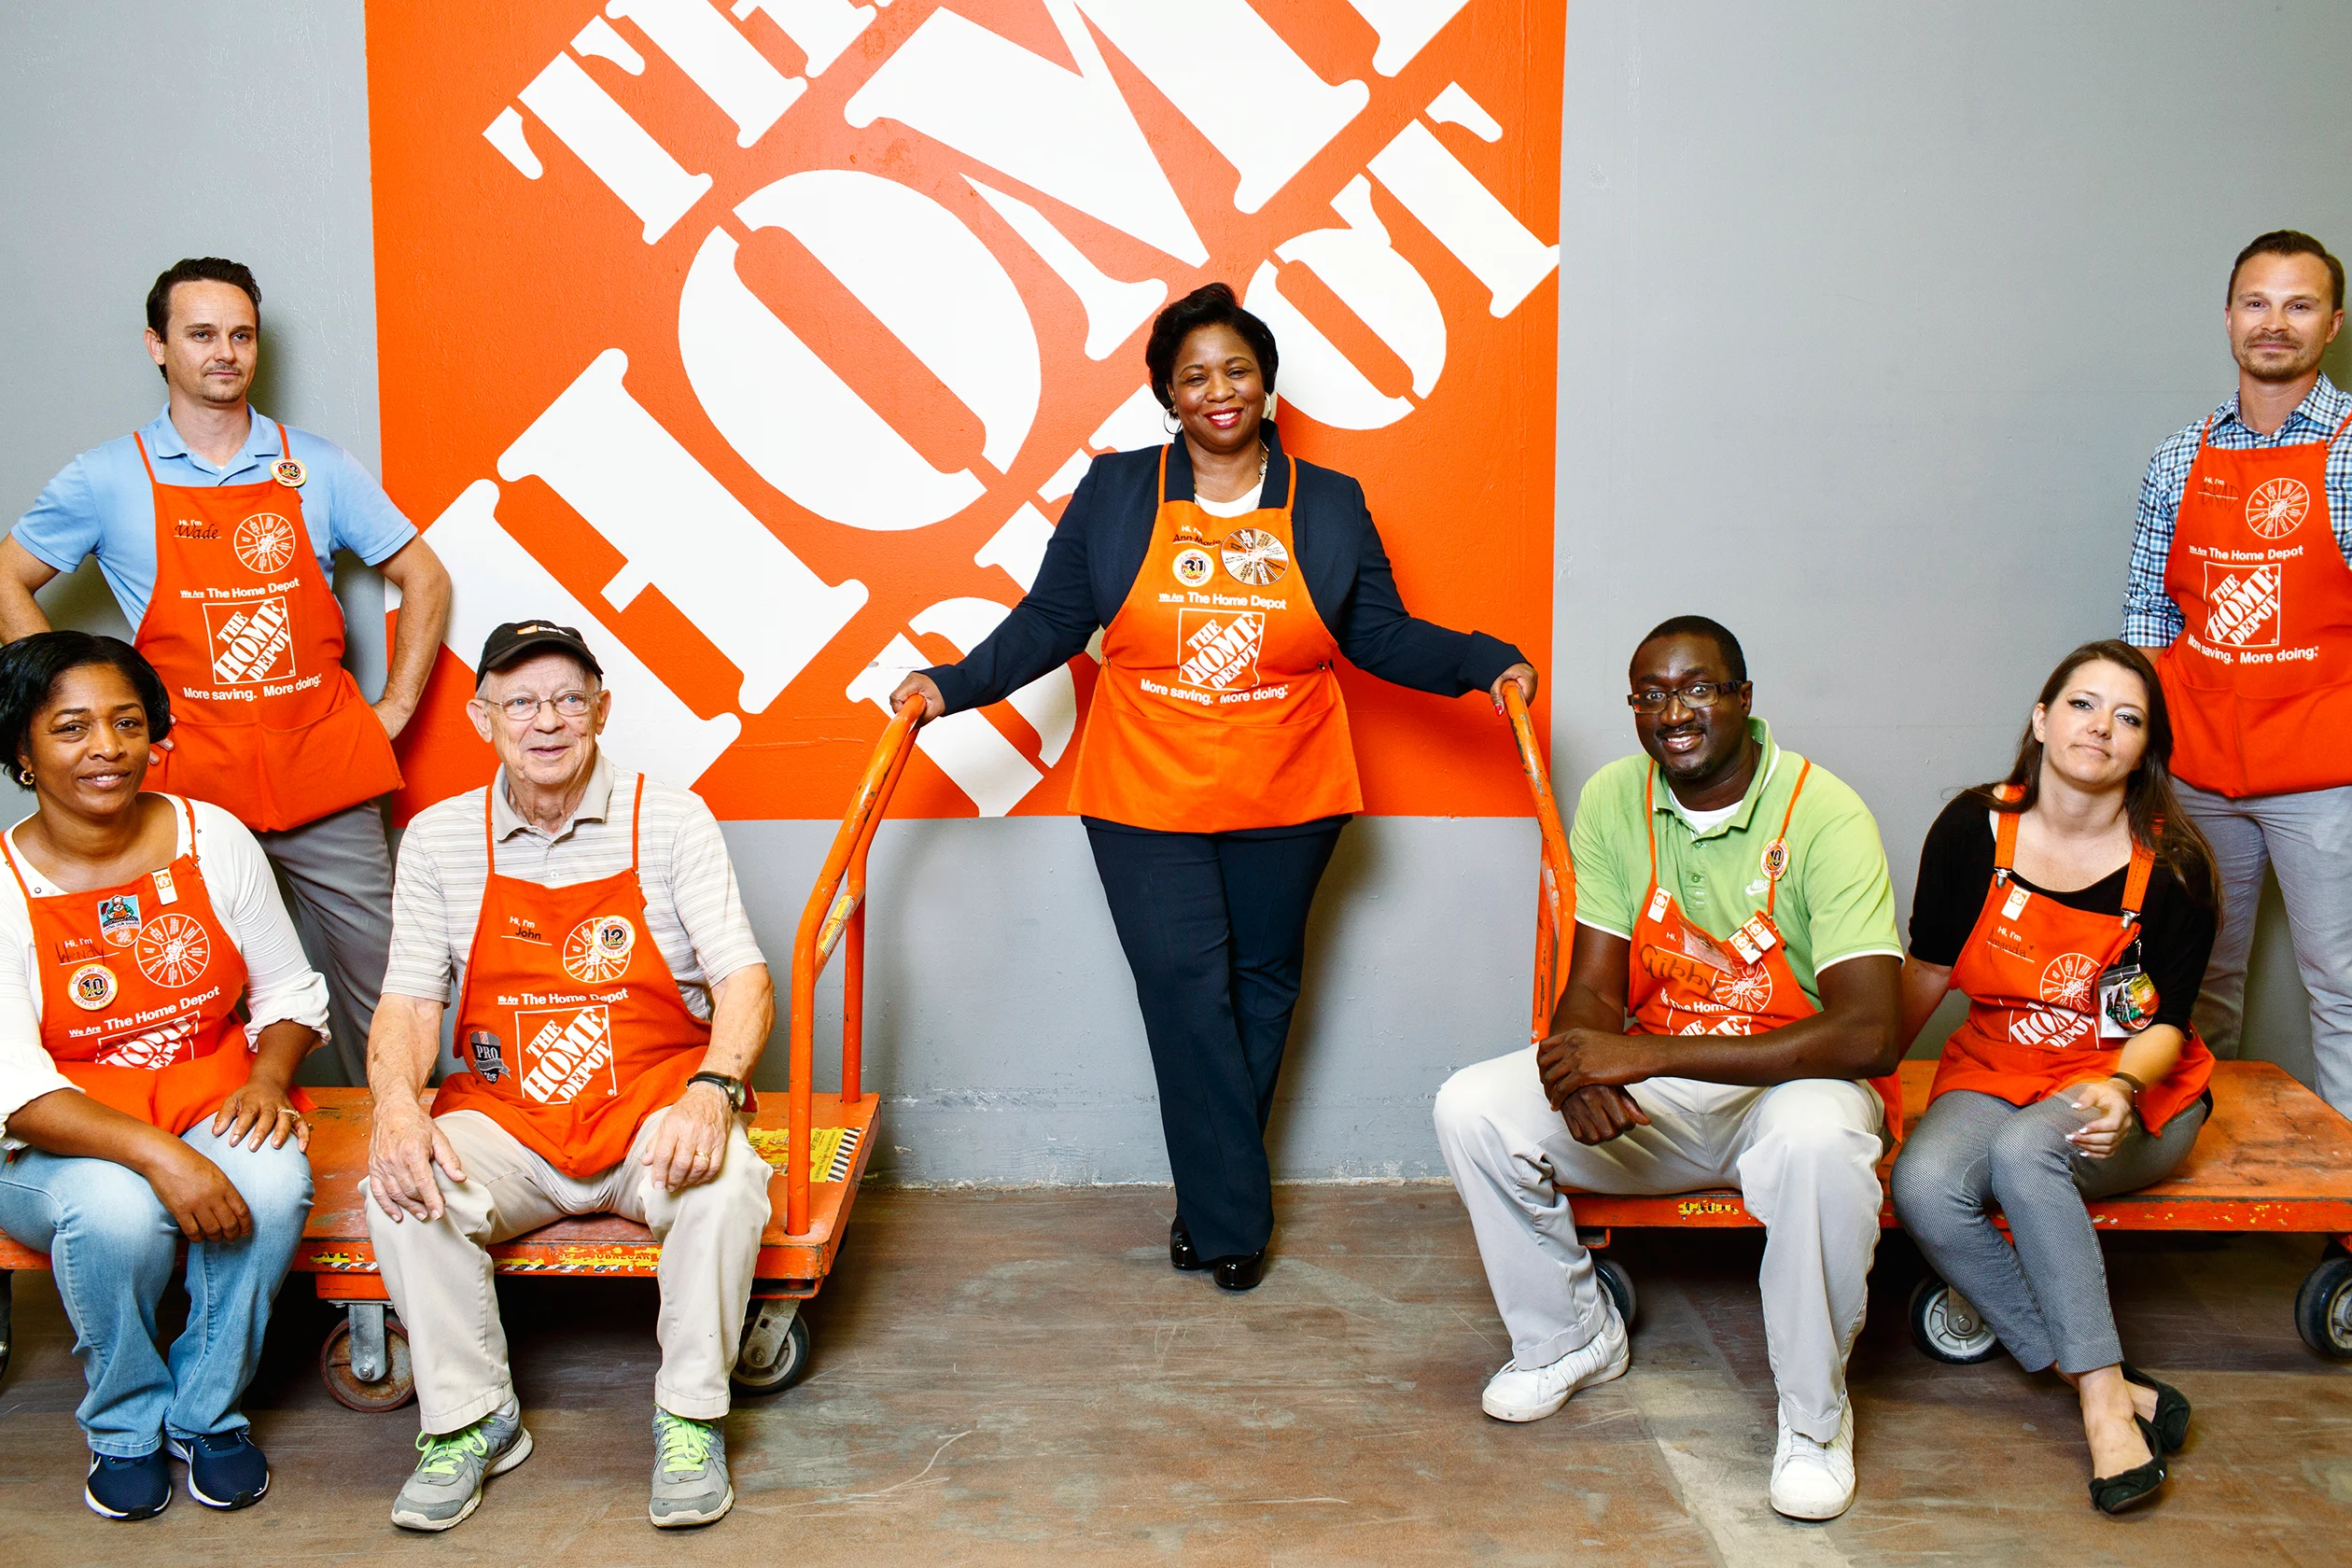 How do Home Depot employees get paid?